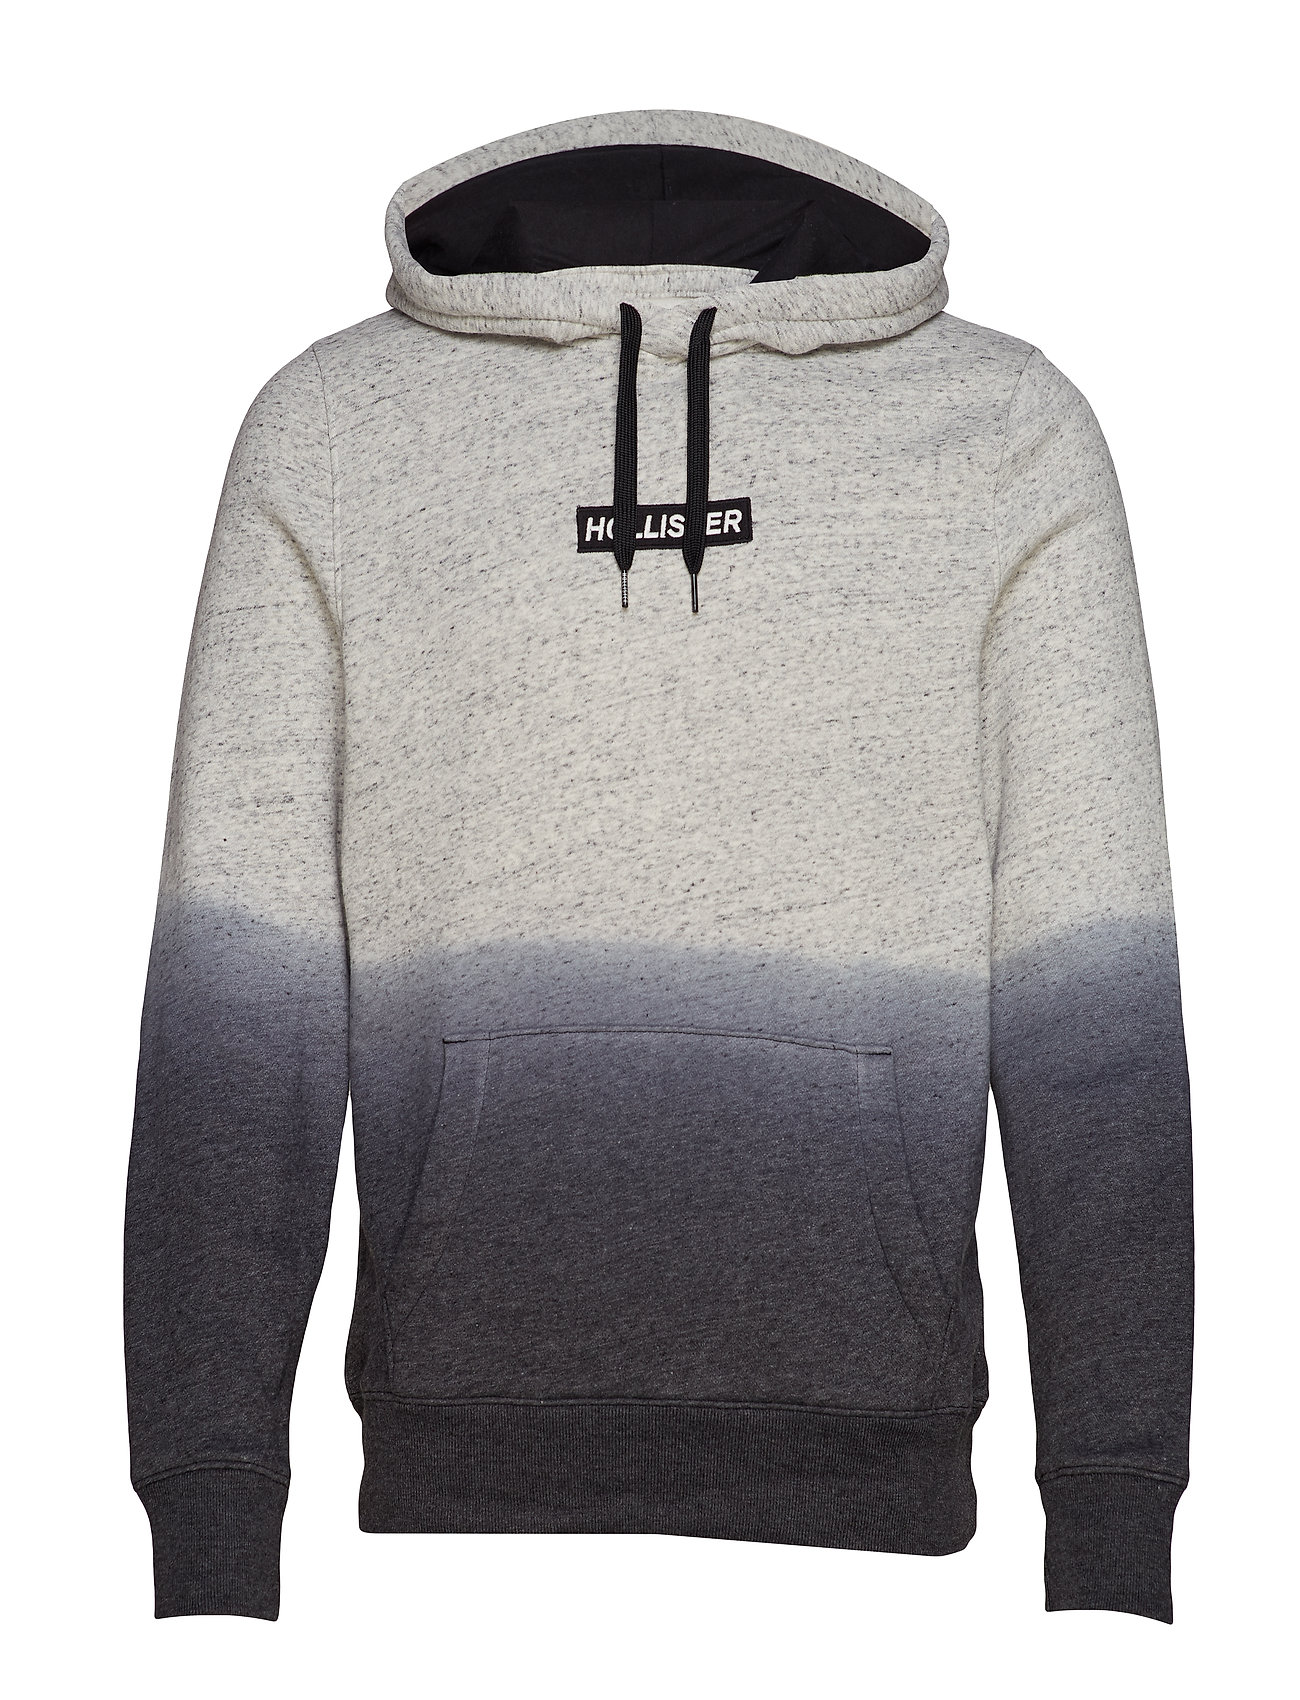 grey and white hollister hoodie